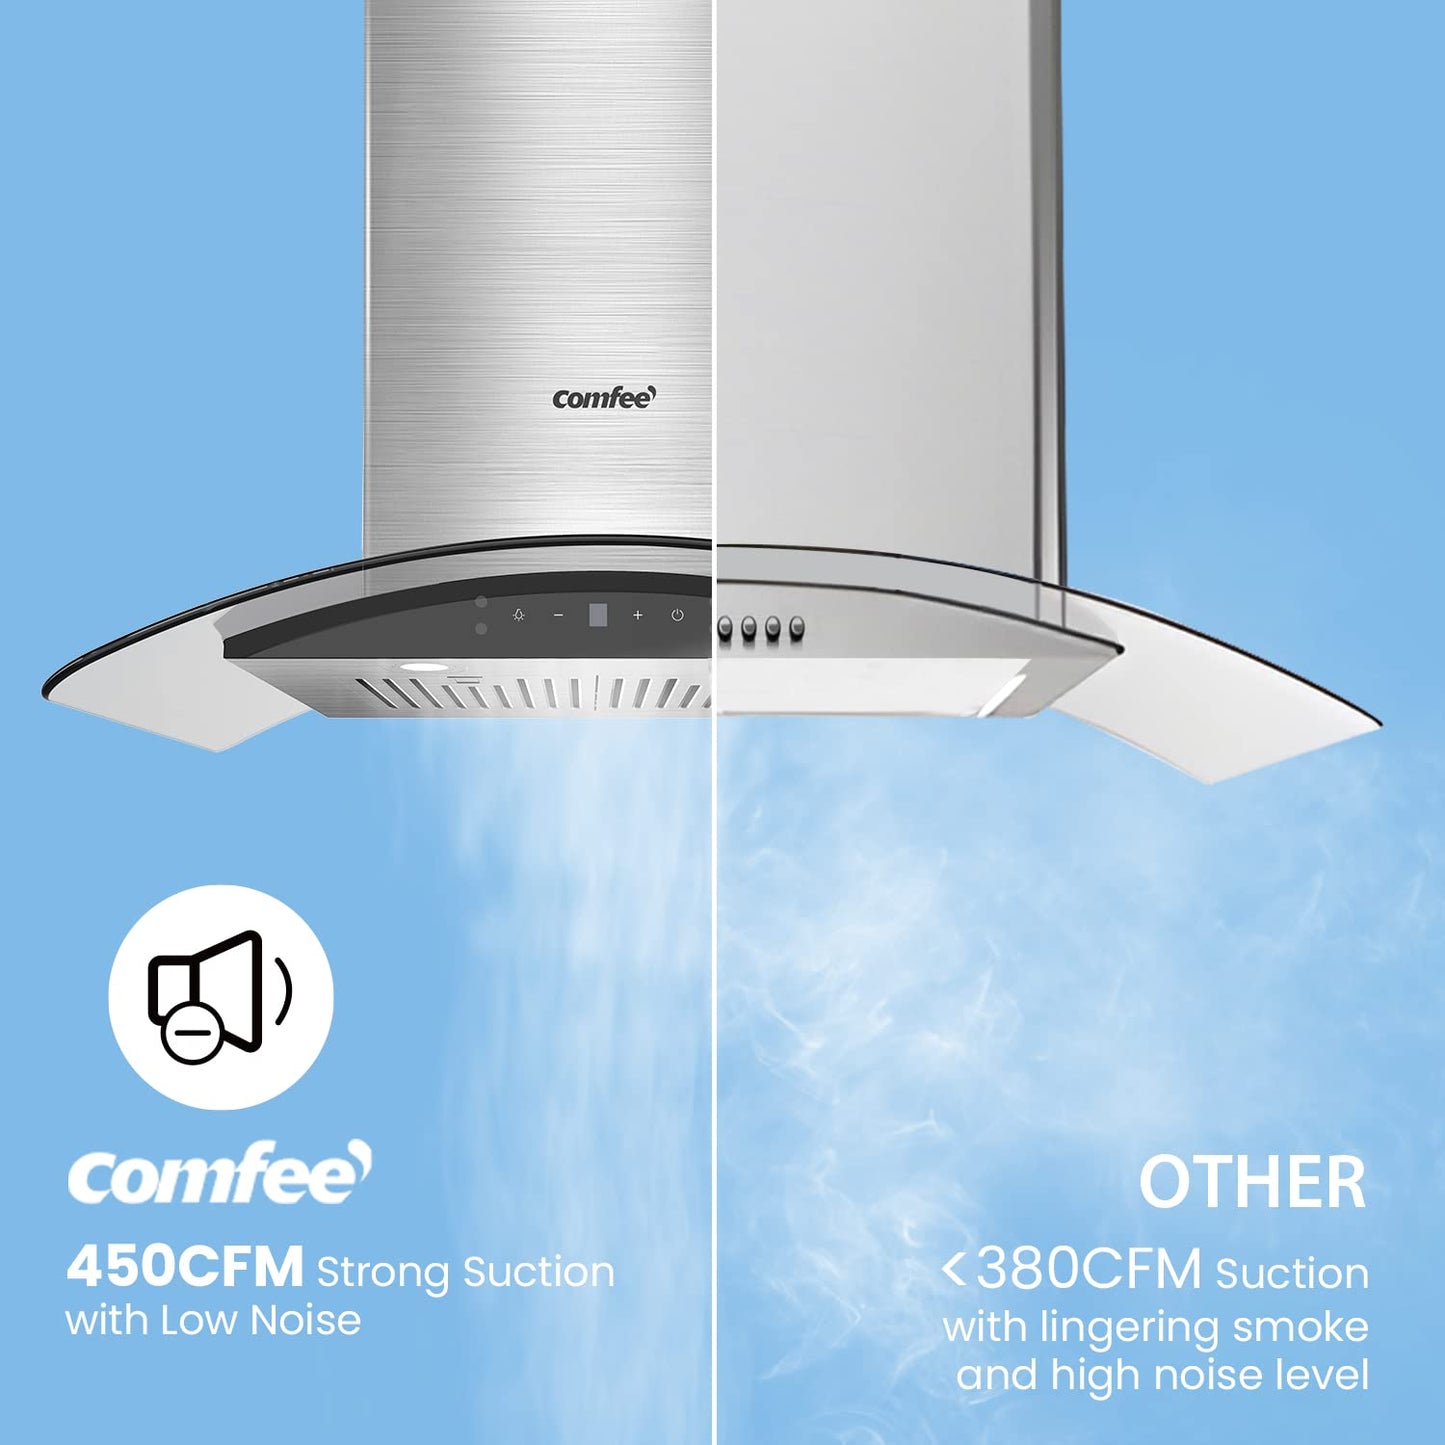 range hood with 3–speed exhaust fan provides up to 450CFM air suction for cooking fumes